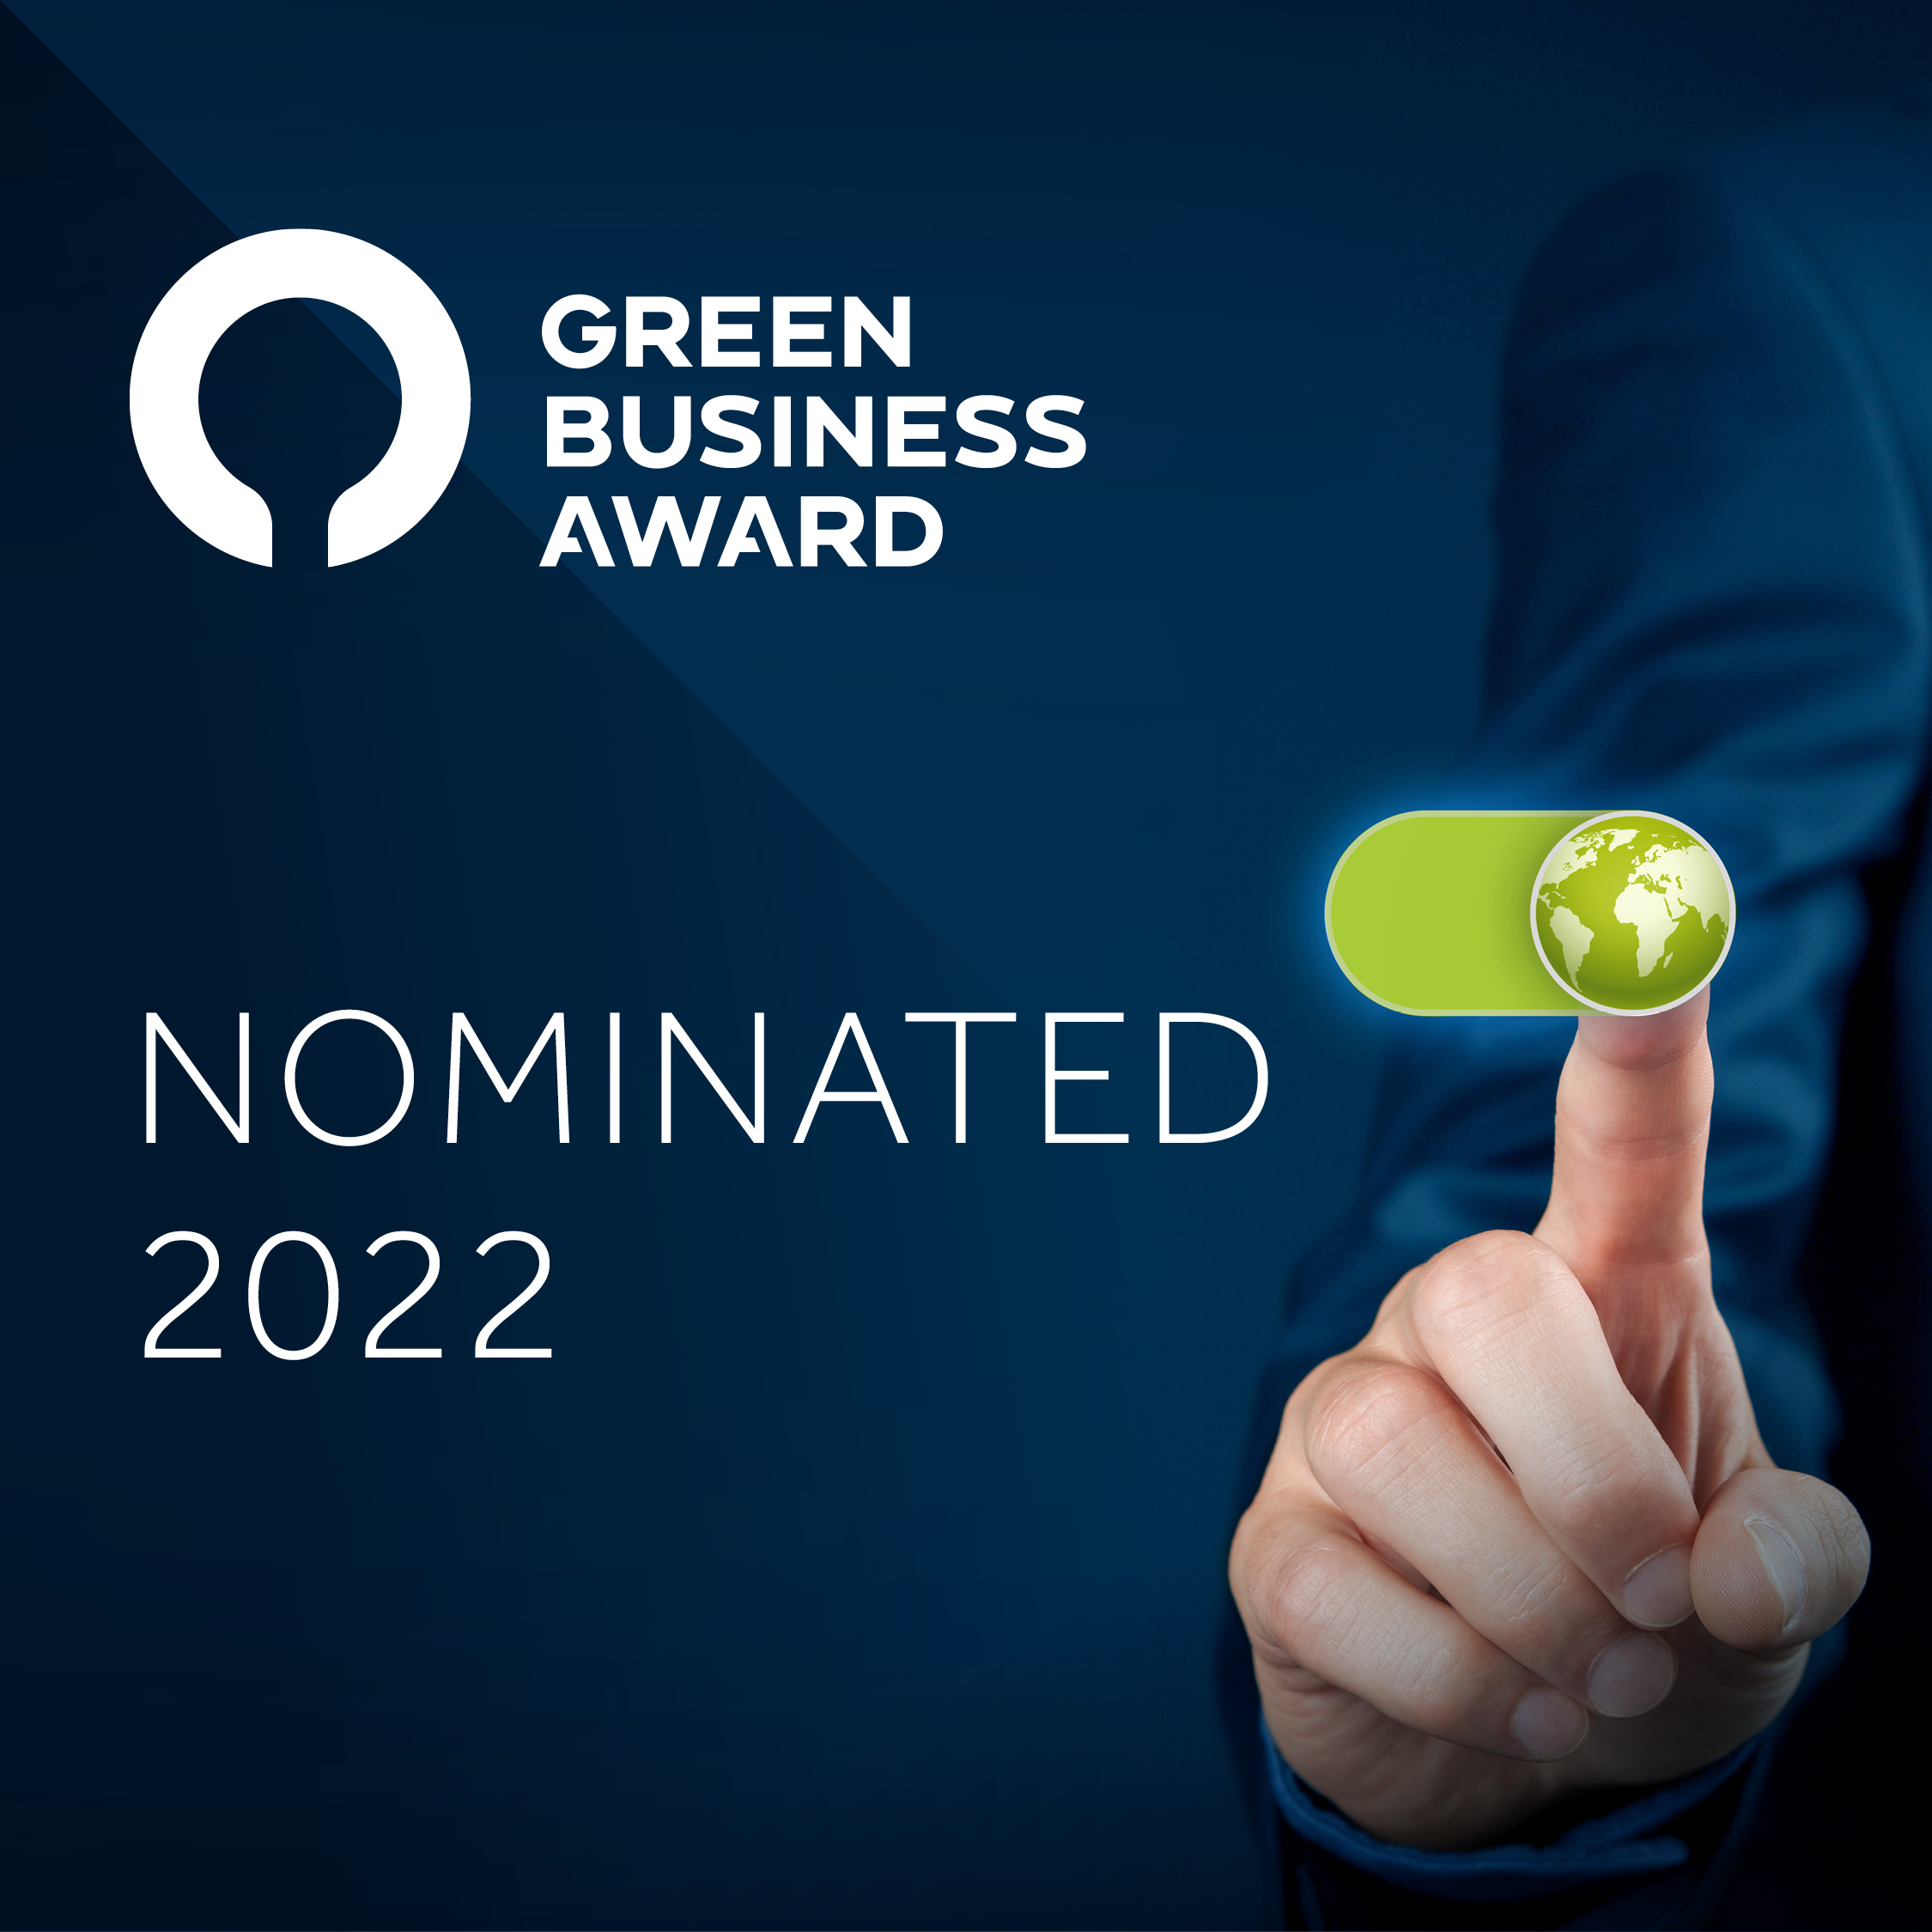 Featured image for “Green Business Award Nominated 2022”